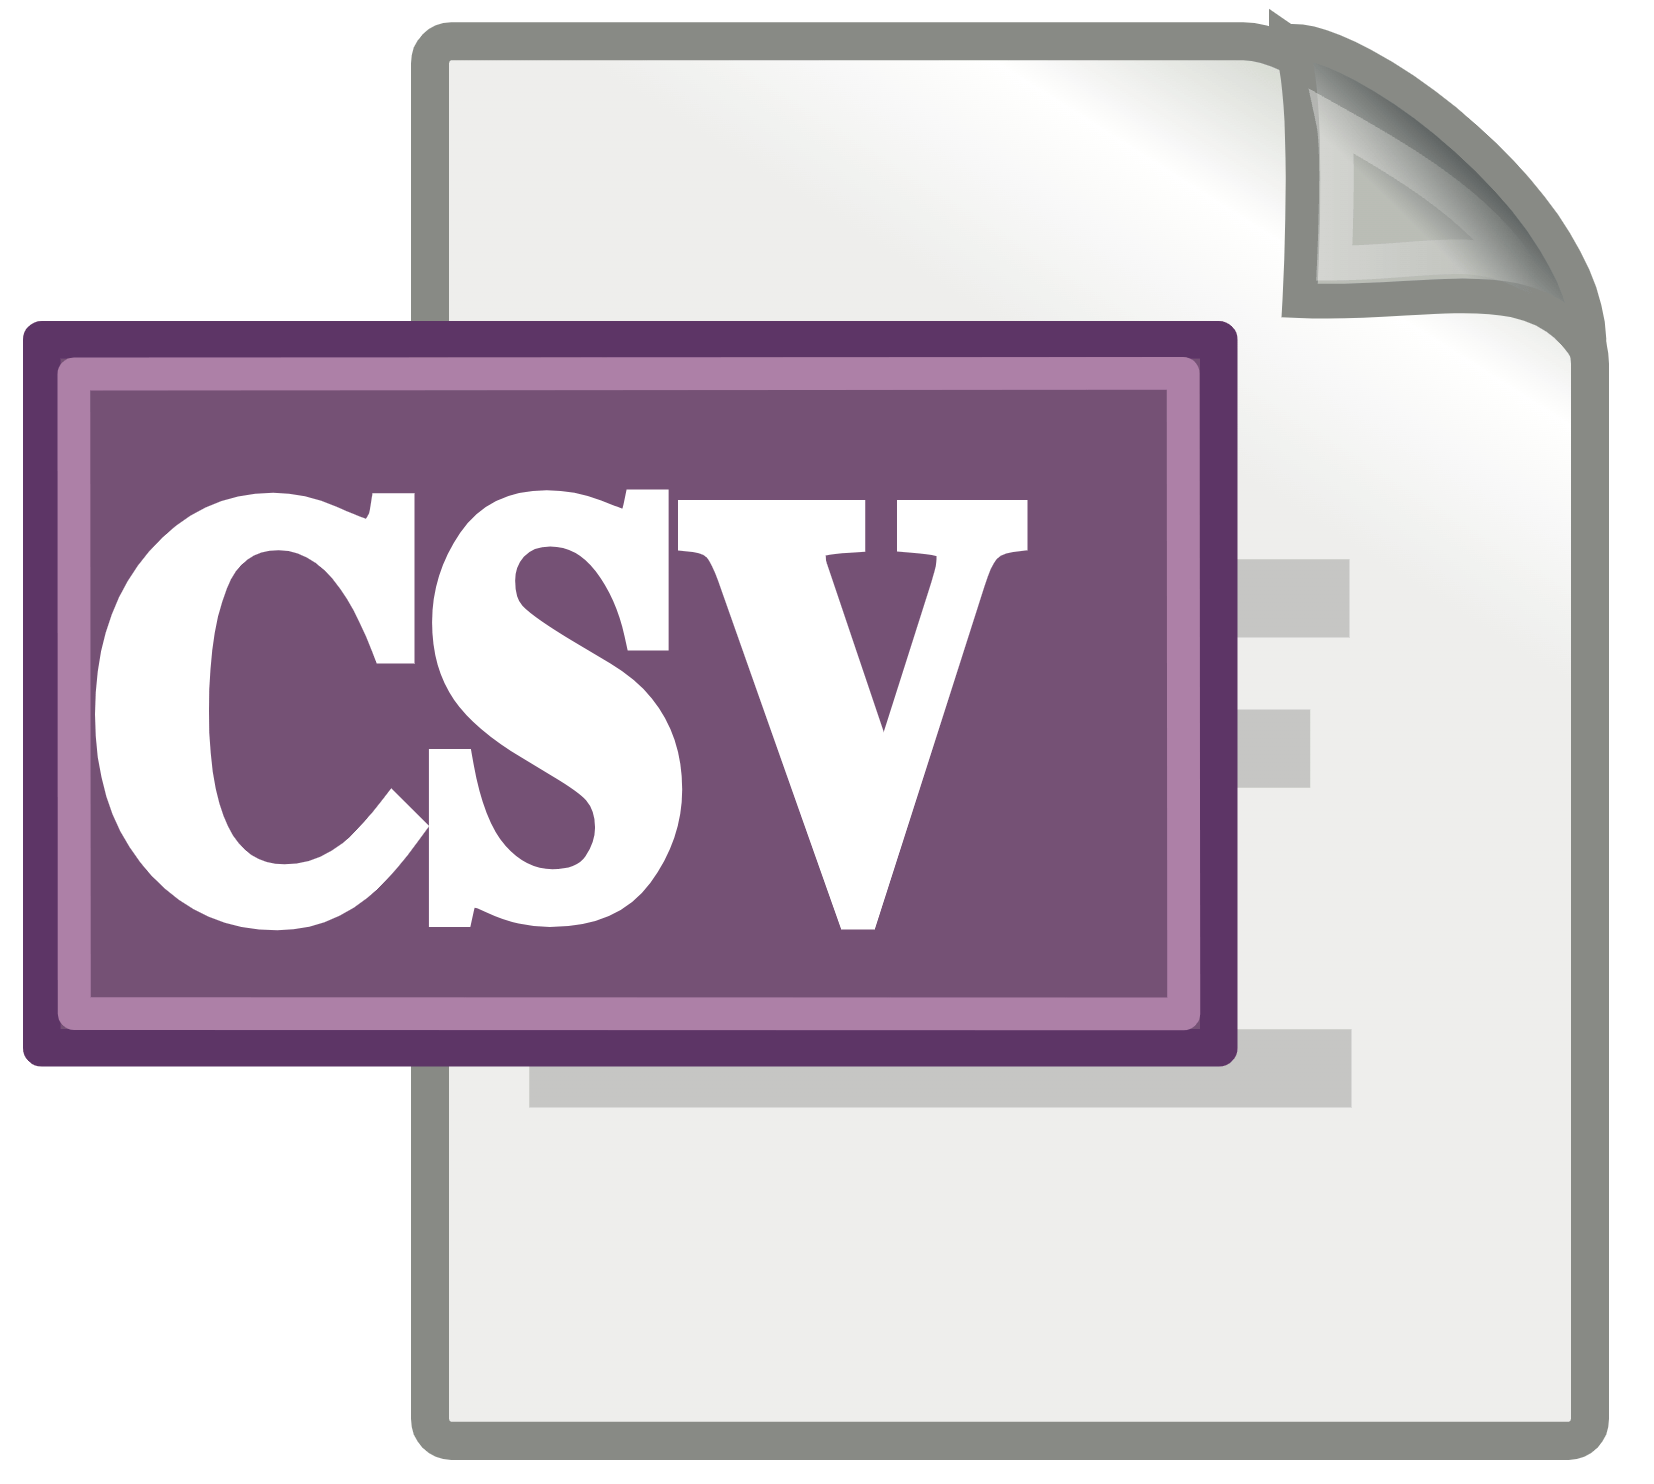 CSV Injection: A Dangerous Yet Overlooked Vulnerability in Application Security